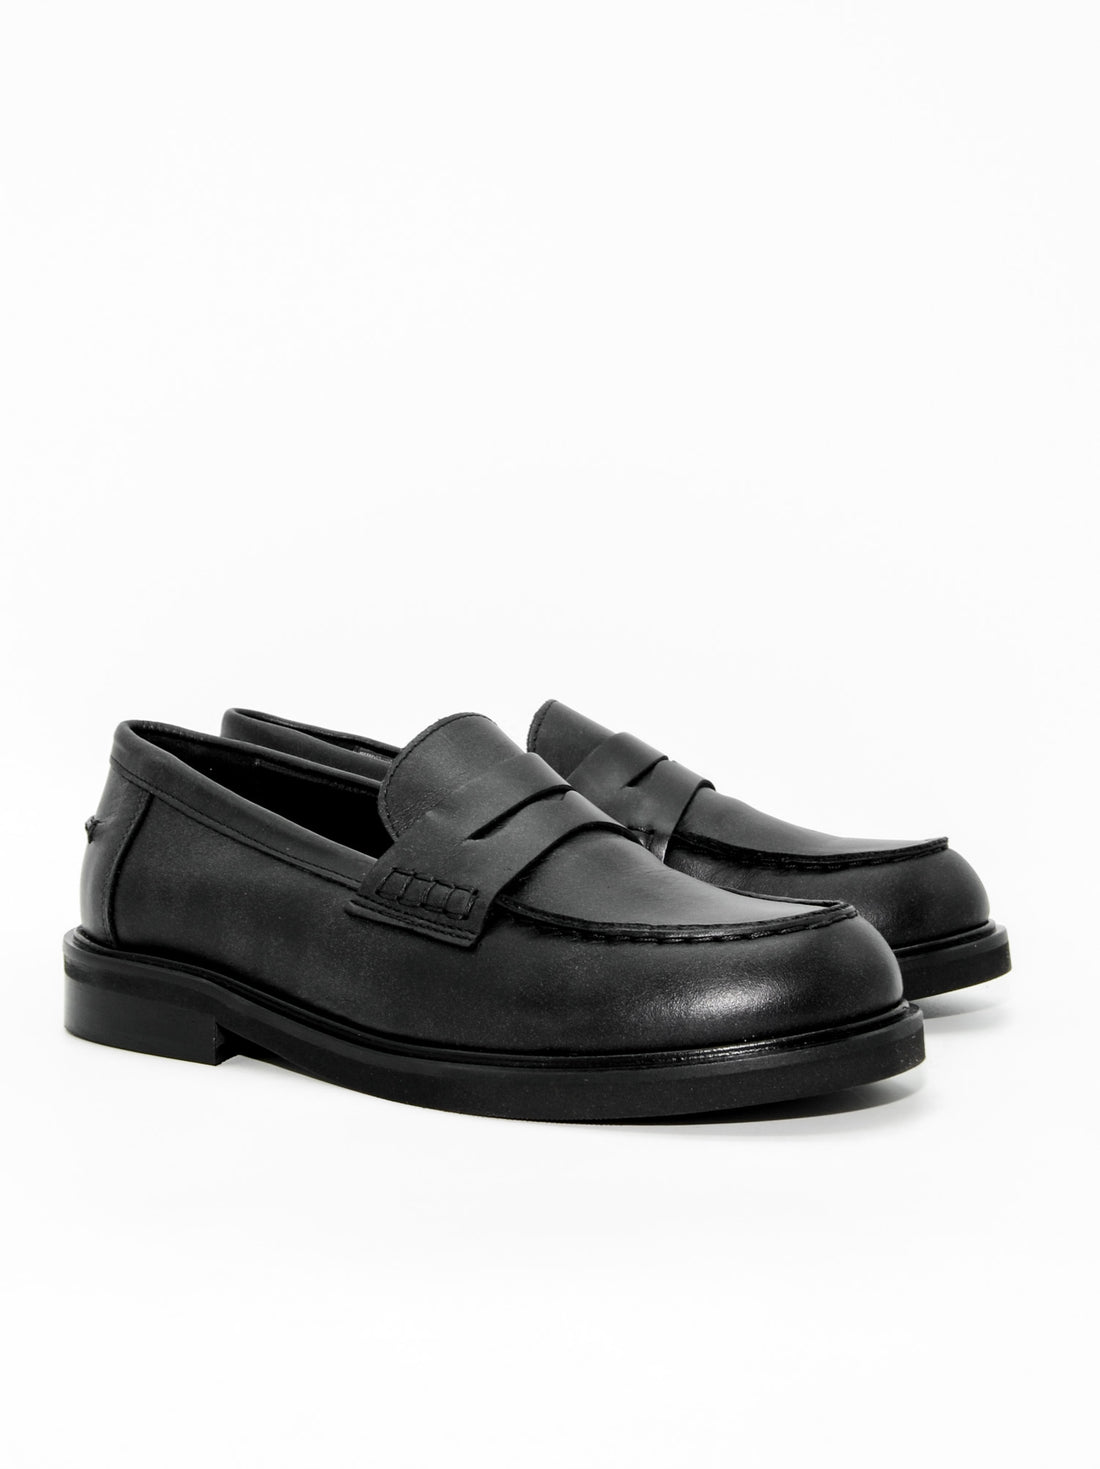 JPG30Q VINTAGE-EFFECT LEATHER LOAFERS